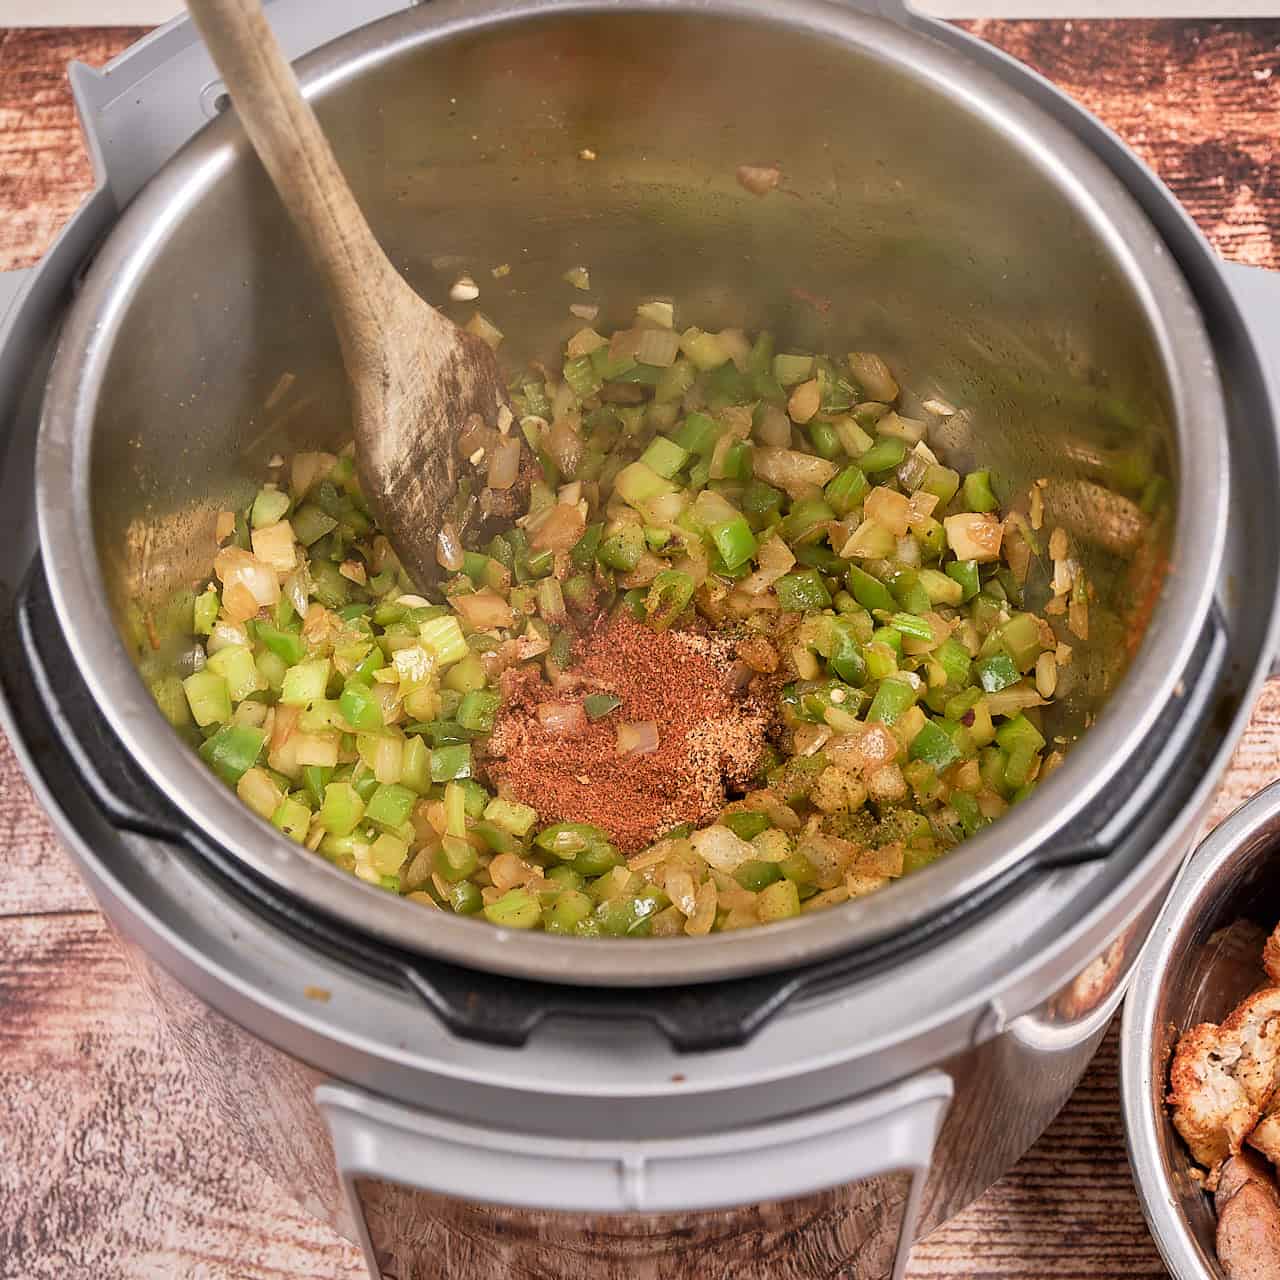 An Instant Pot full of sauteed onions, peppers, and celery, with Cajun Seasoning in the middle.